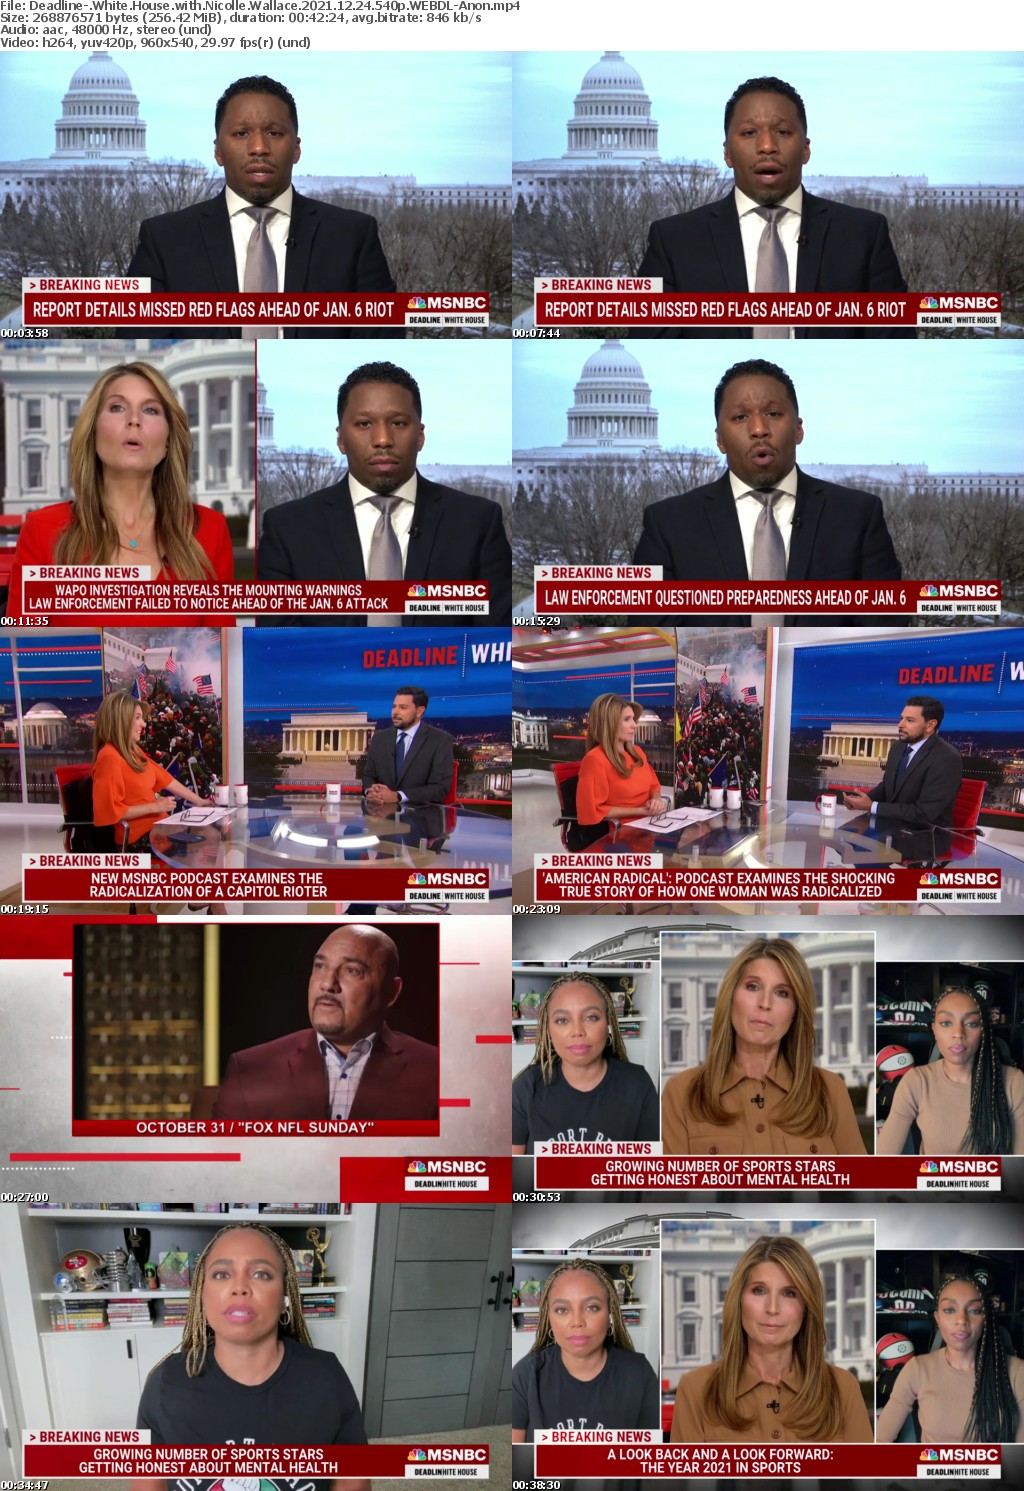 Deadline- White House with Nicolle Wallace 2021 12 24 540p WEBDL-Anon